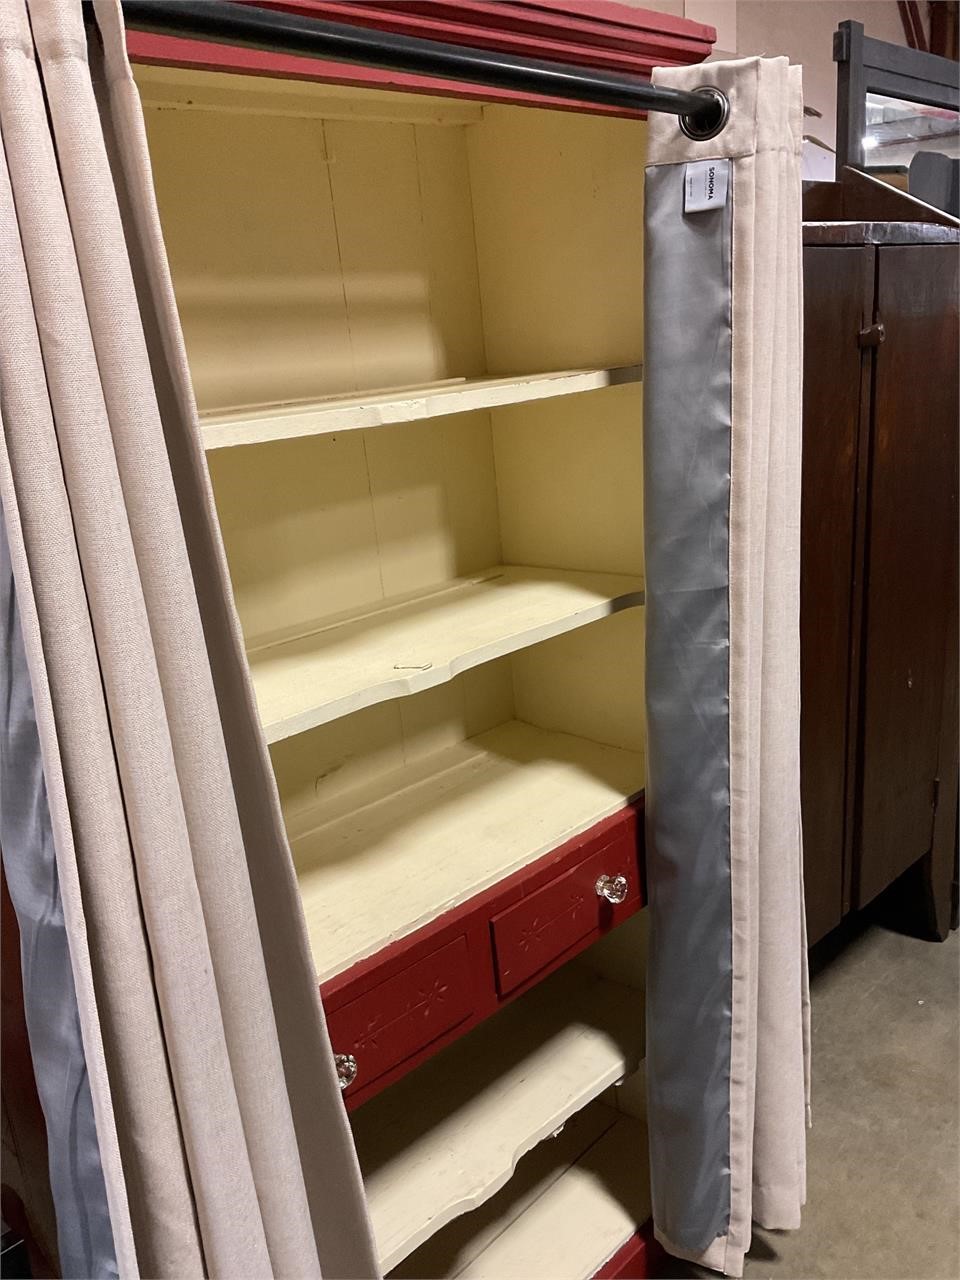 Pantry with curtains and shelves